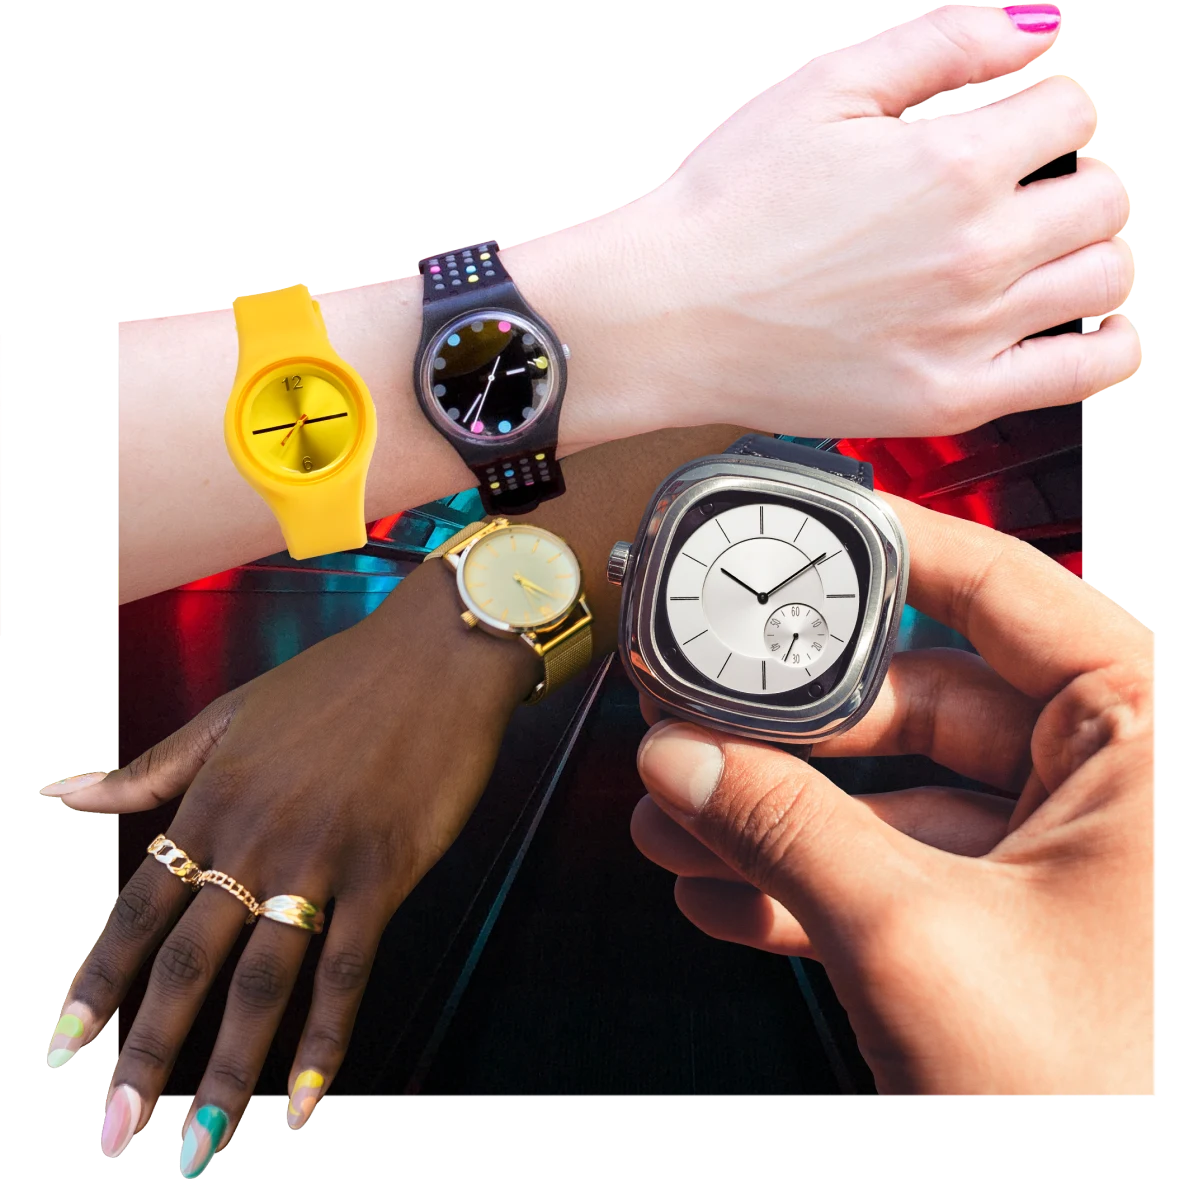 Two wrists are sporting yellow, black and gold watches, with a hand holding a large, silver watch on the left.